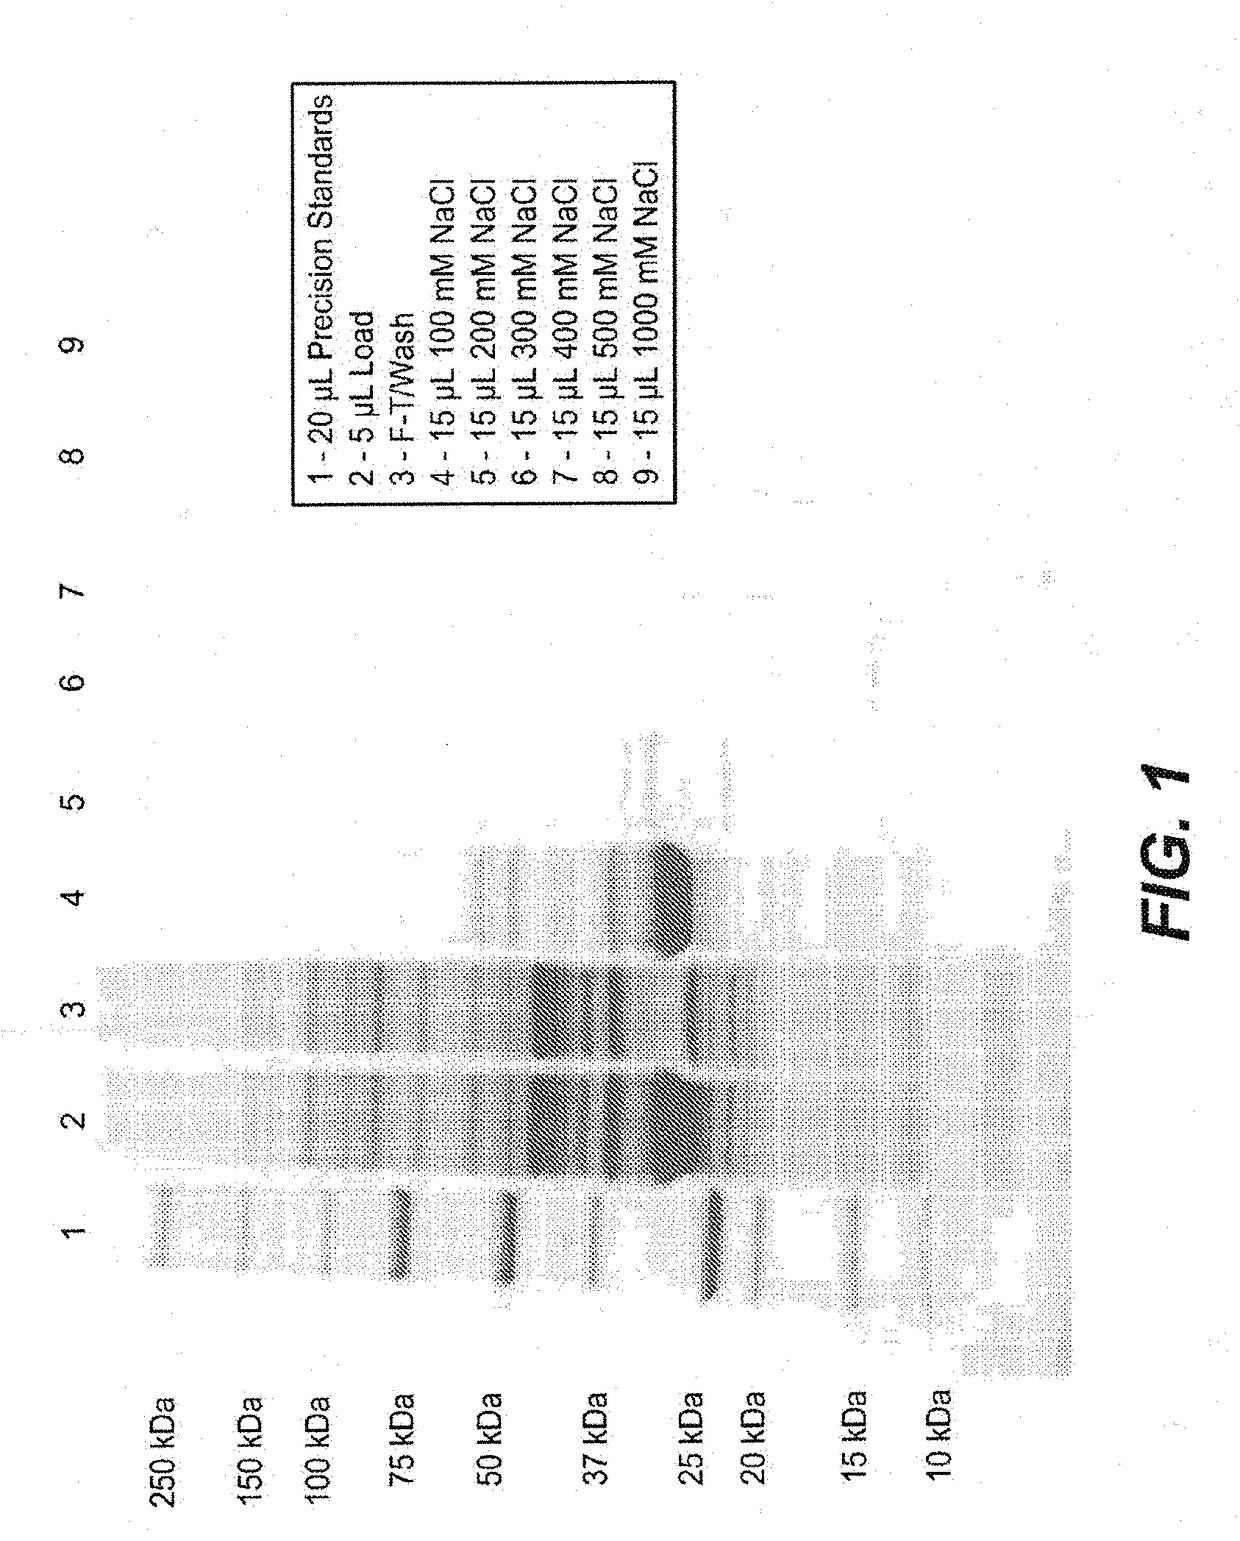 Purification of fkpa  and uses thereof for producing recombinant polypeptides